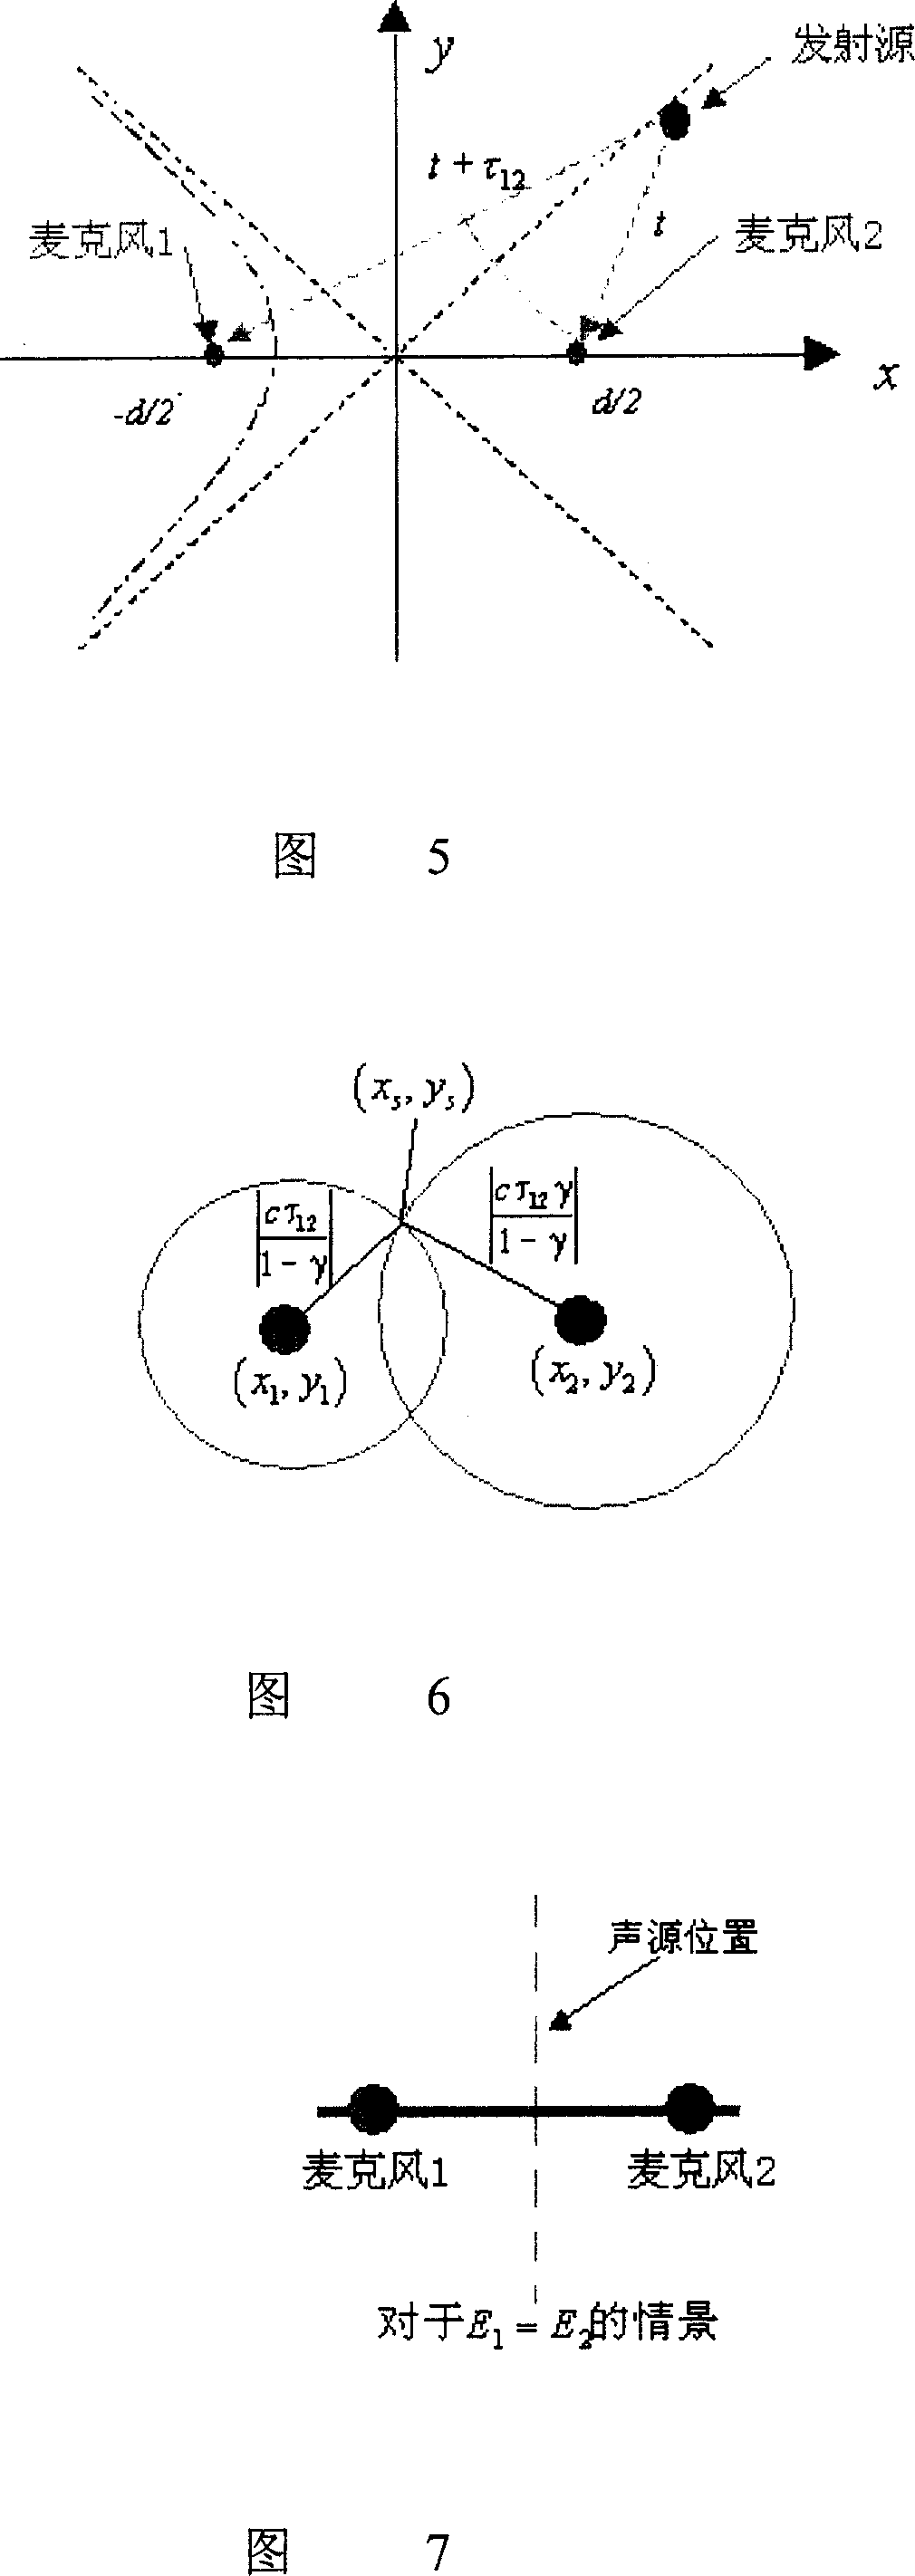 Method and device for localization of sound source by microphone